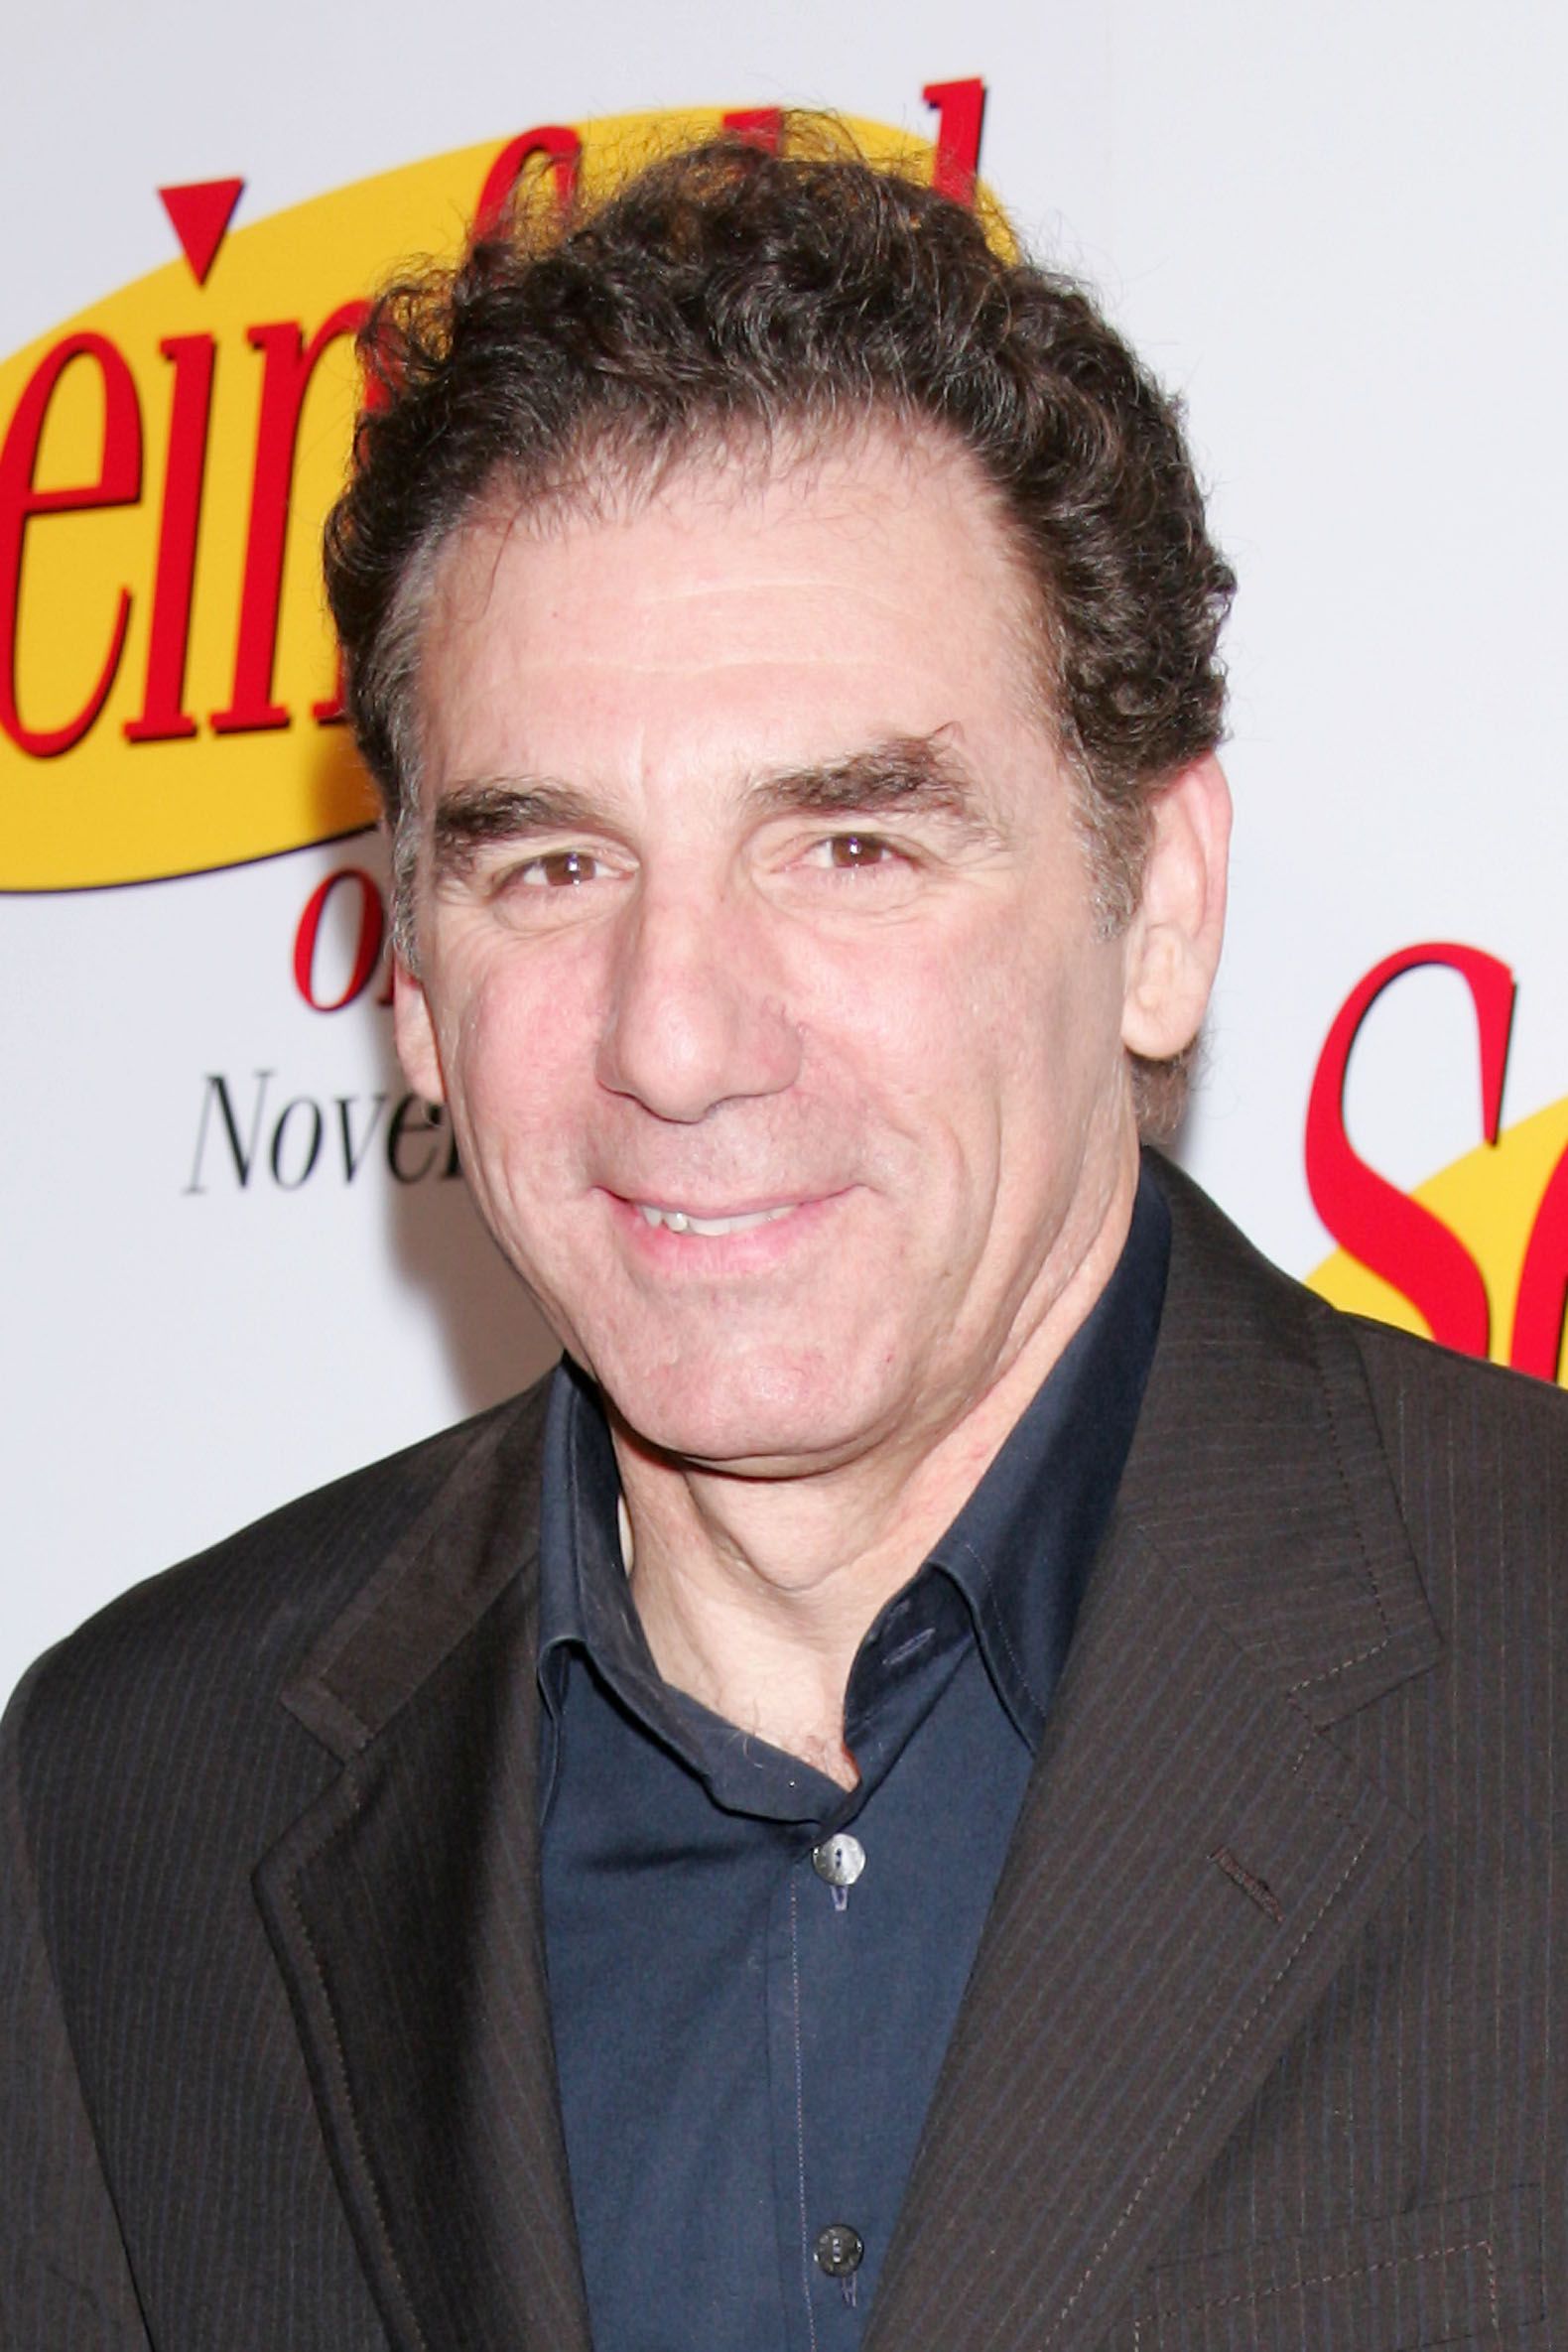 Michael Richards at the 2004 Seinfeld DVD release party